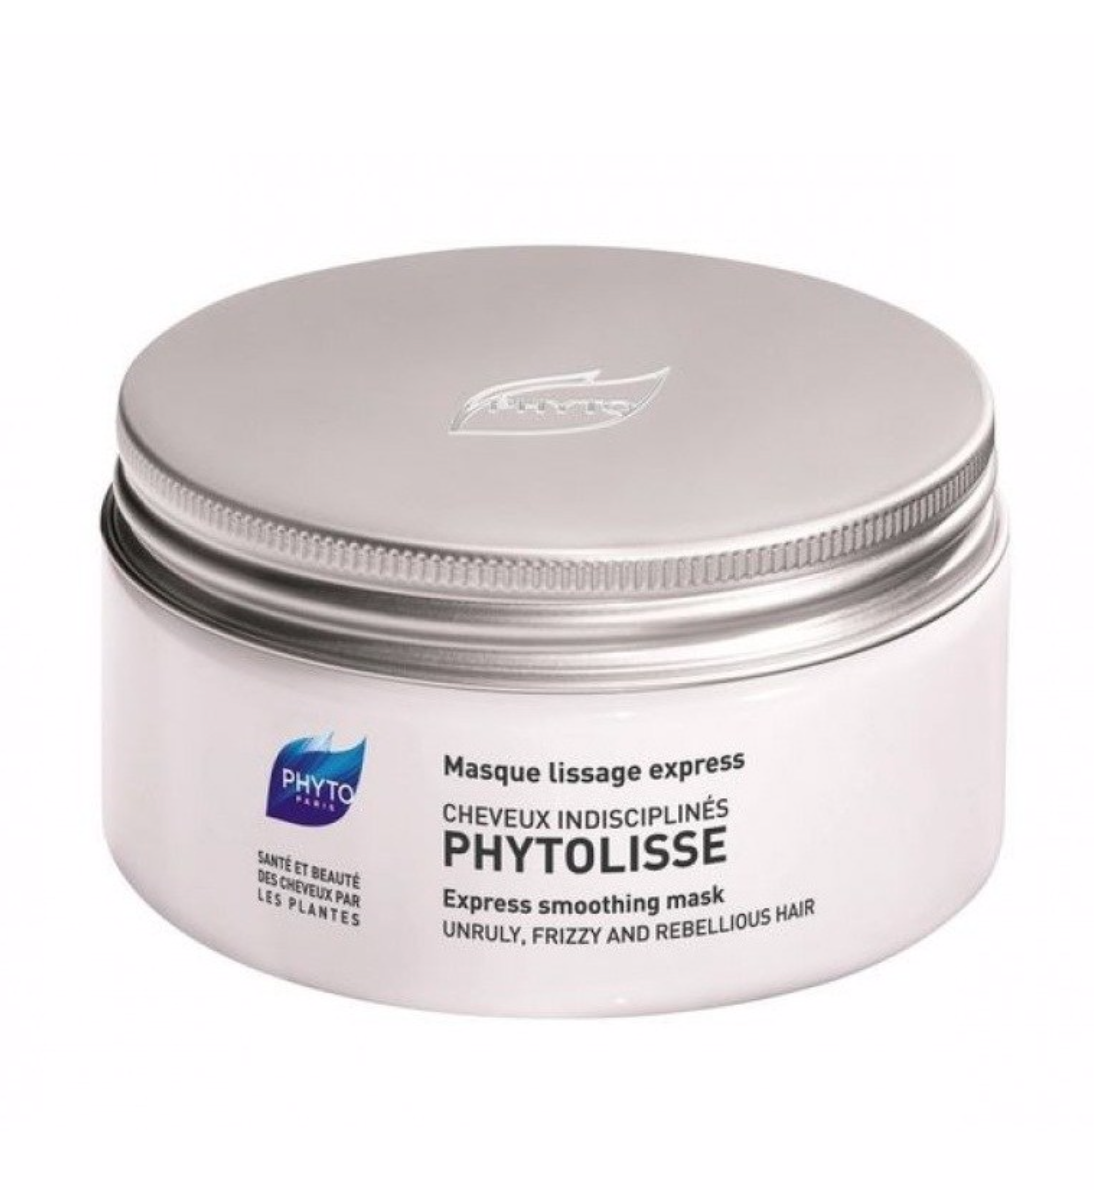 Shop Phyto Phytolisse Express Smoothing Mask 6.7 fl oz.at New London Pharmacy. Free shipping on all orders of $50.00. 